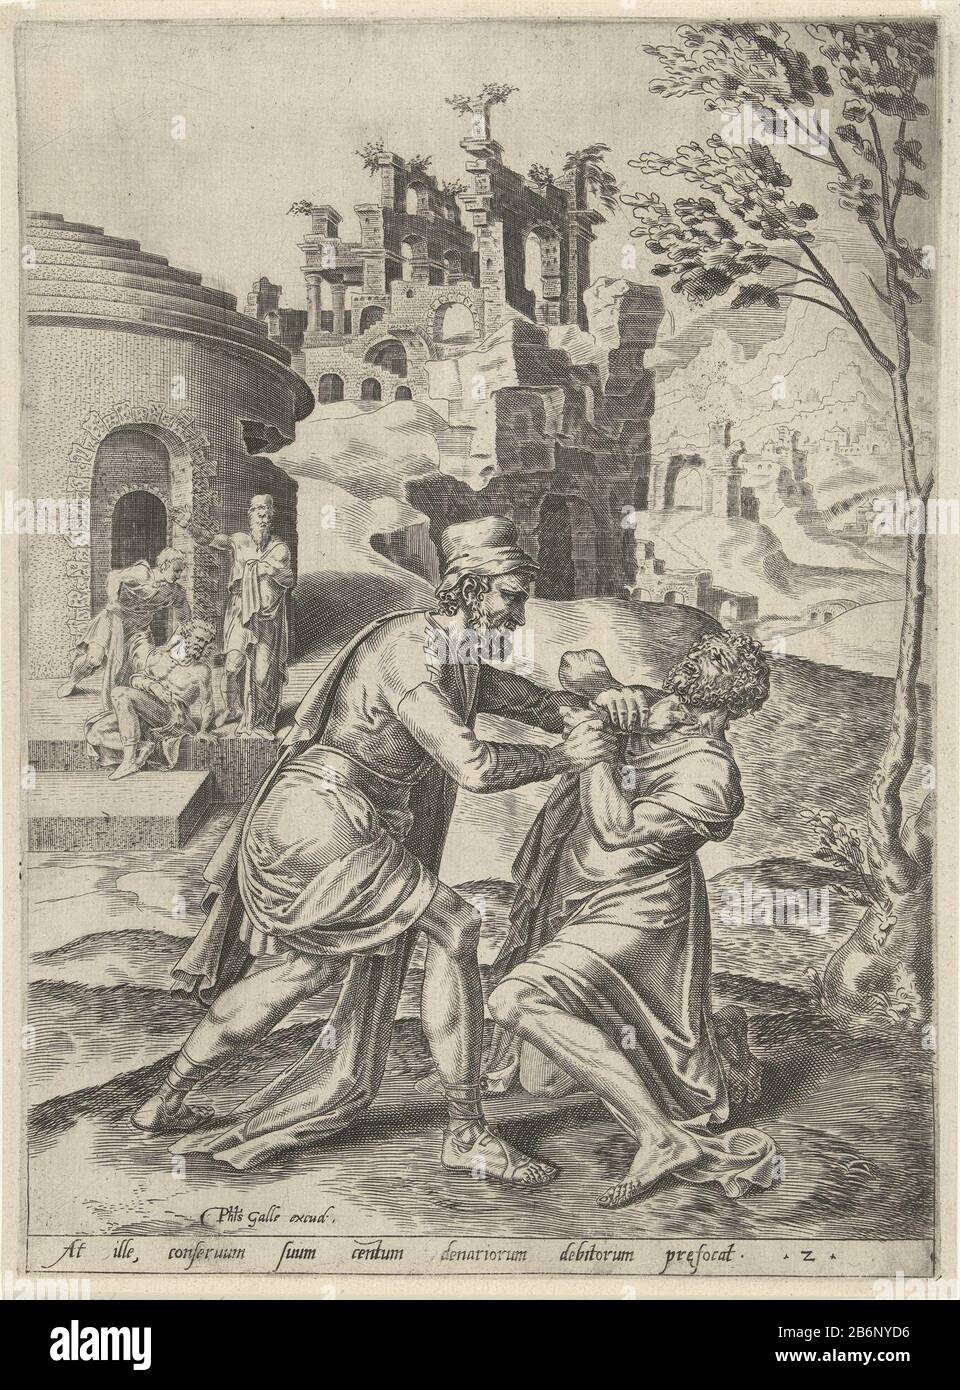 Gevecht tussen de ondankbare knecht en een schuldenaar Gelijkenis van de ondankbare knecht (serietitel) The ungrateful servant is one of his debtors to, strangles him and demands his money back. The picture has a caption Latin and is part of a four part series on the parable of the unmerciful knecht. Manufacturer : printmaker: Dirck Volckertsz. Coornhert to design: Maarten van Heemskerck Publisher: Philip Galle (listed property) Place manufacture: printmaker: Haarlem To design: Haarlem Publisher: Antwerp Date: 1554 and / or 1554 - 1612 Physical features: engra and etching material: paper Techn Stock Photo